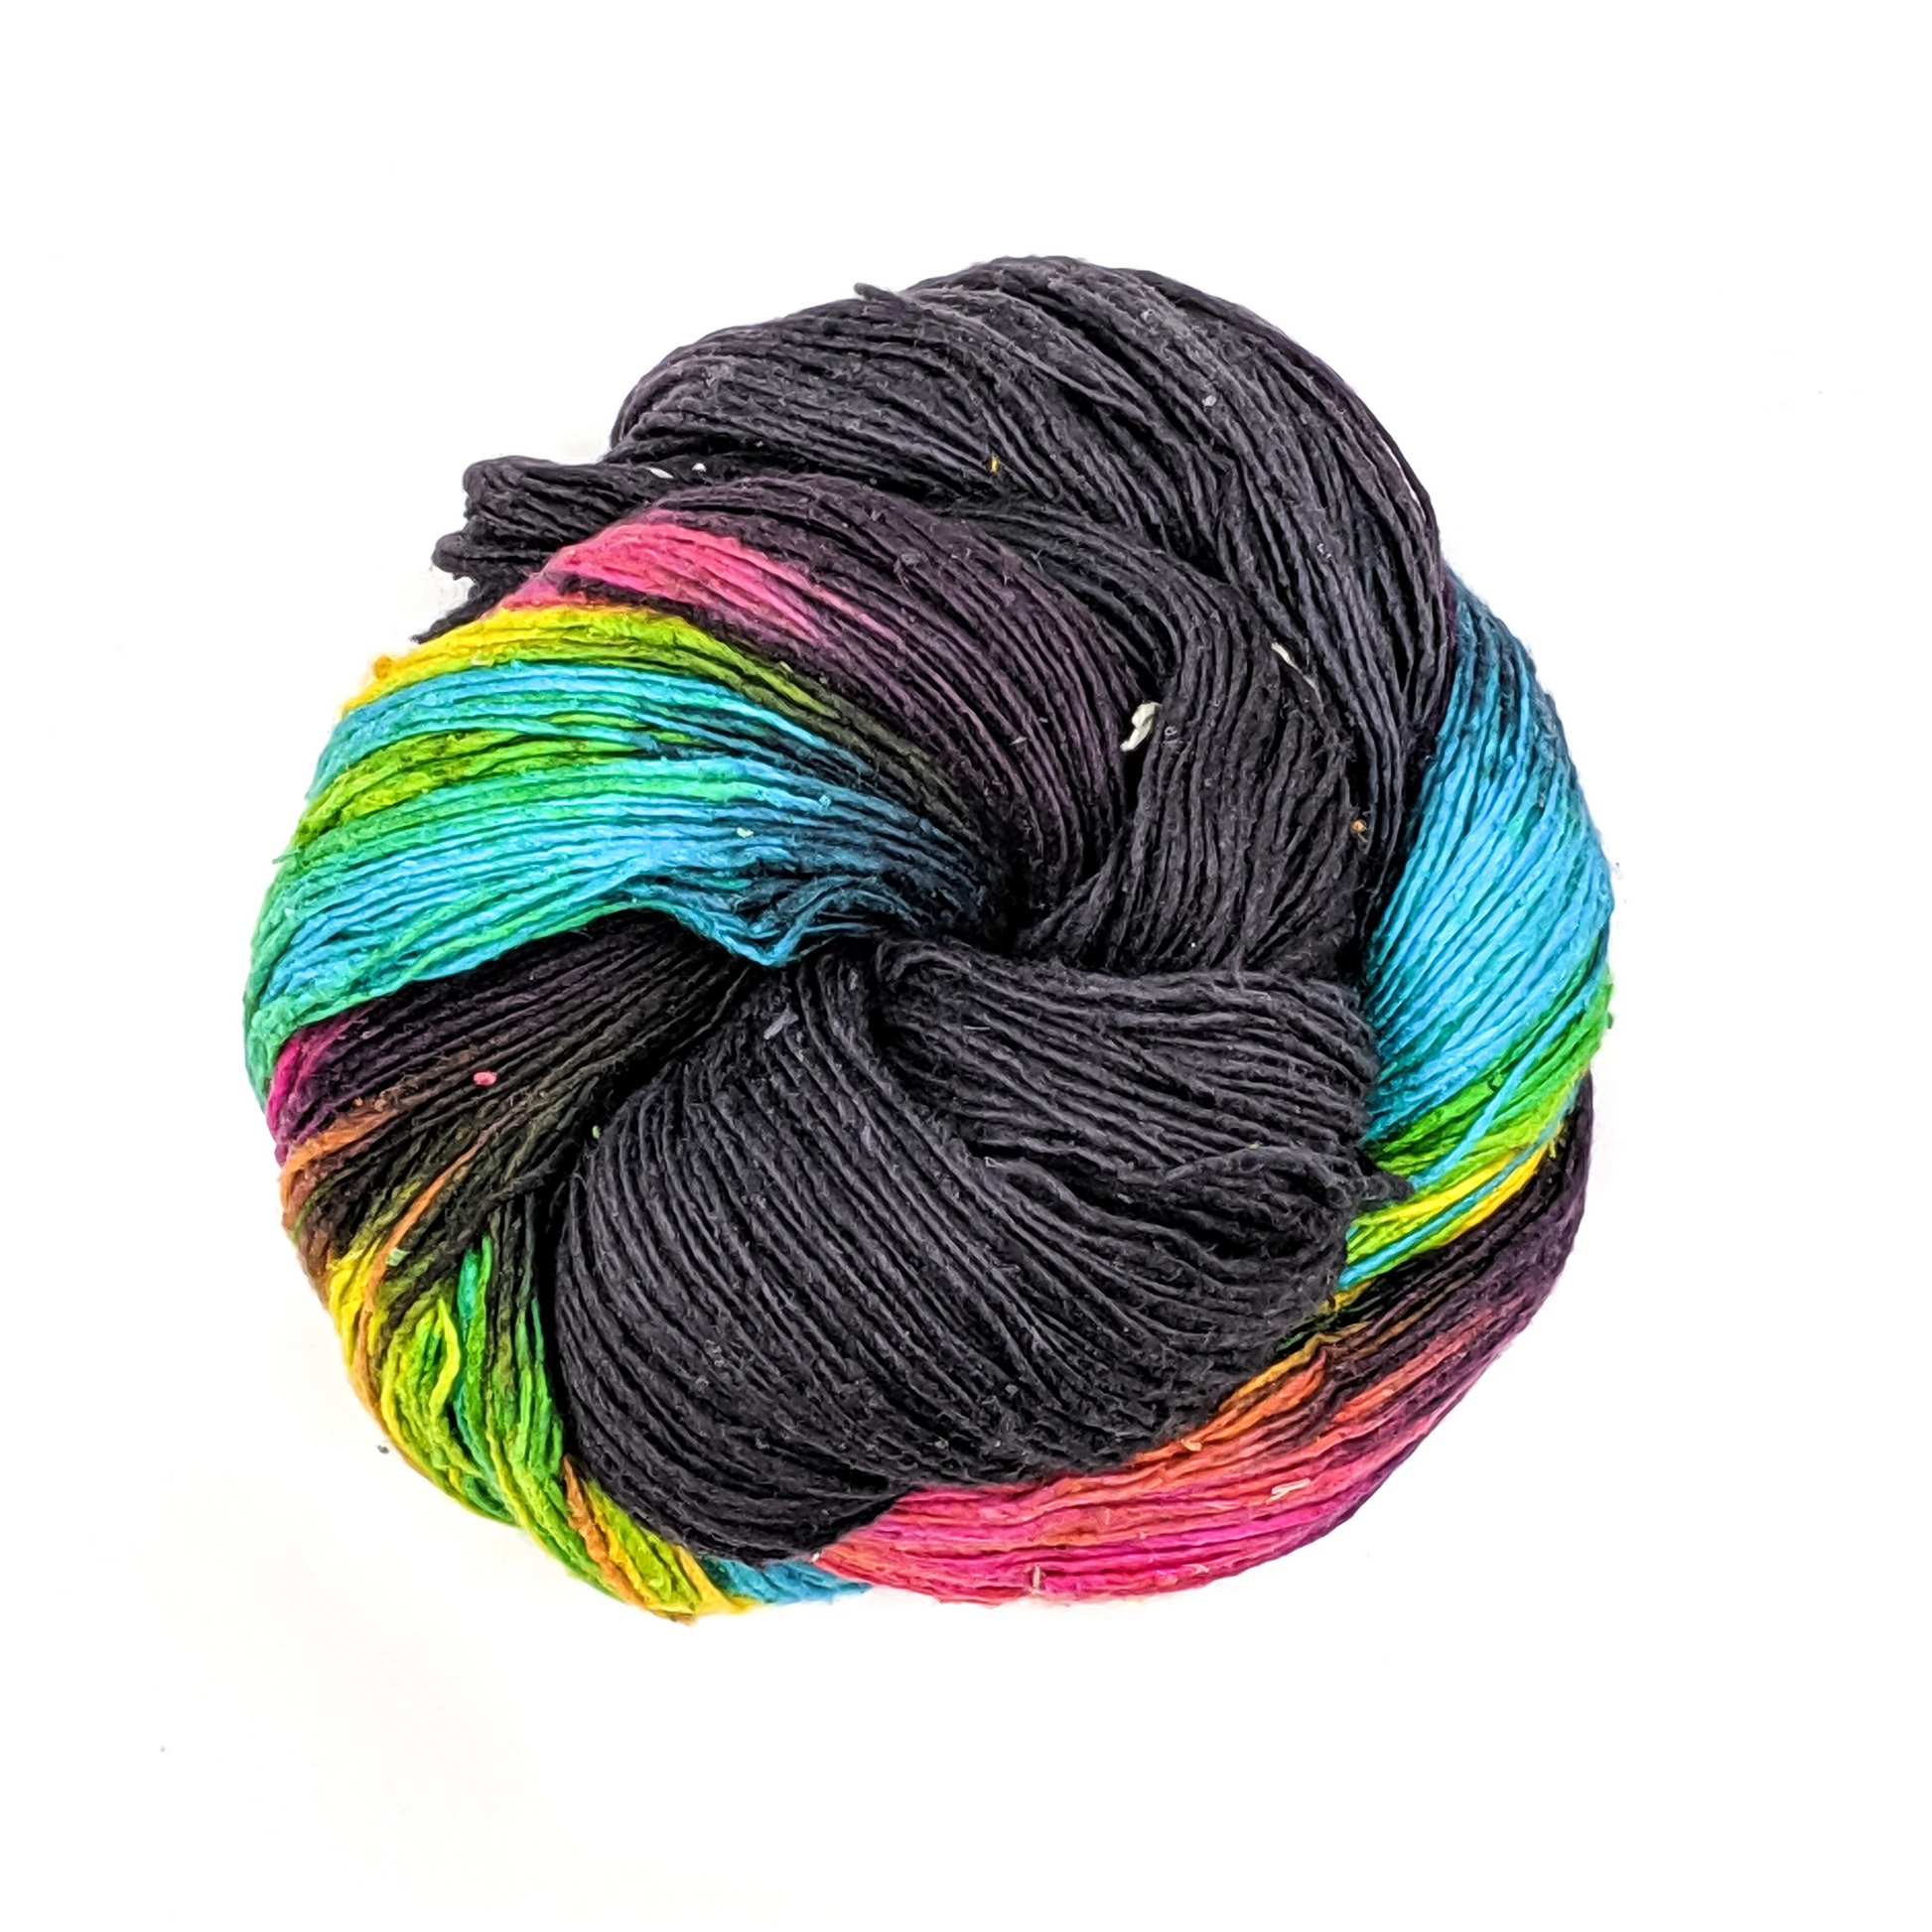 a skein of lace weight silk yarn in black and multi colors